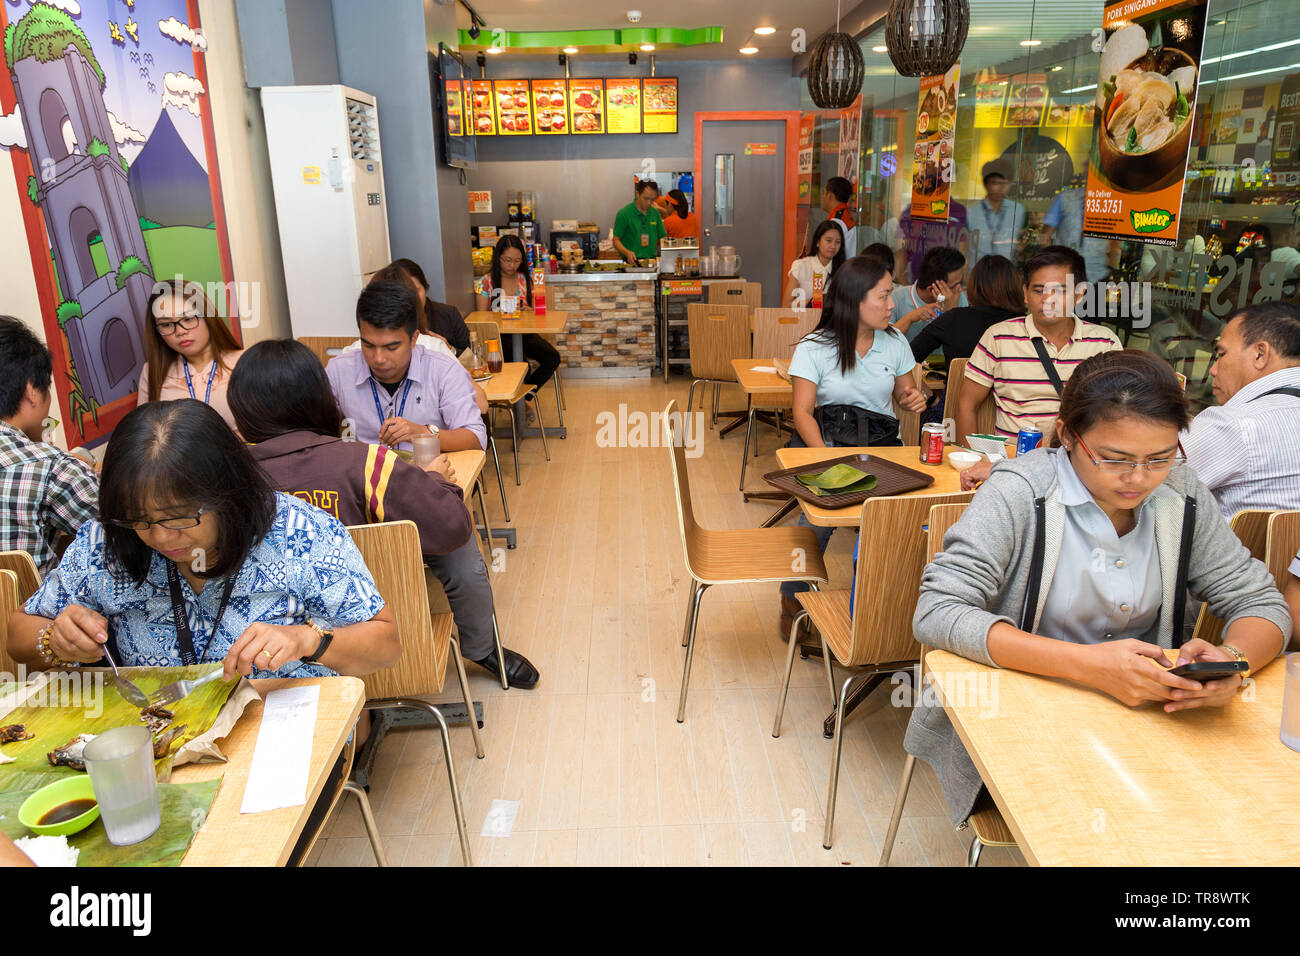 Manila, Philippines - July, 26, 2016: People eating lunch in a popular filipino fast food chain Stock Photo